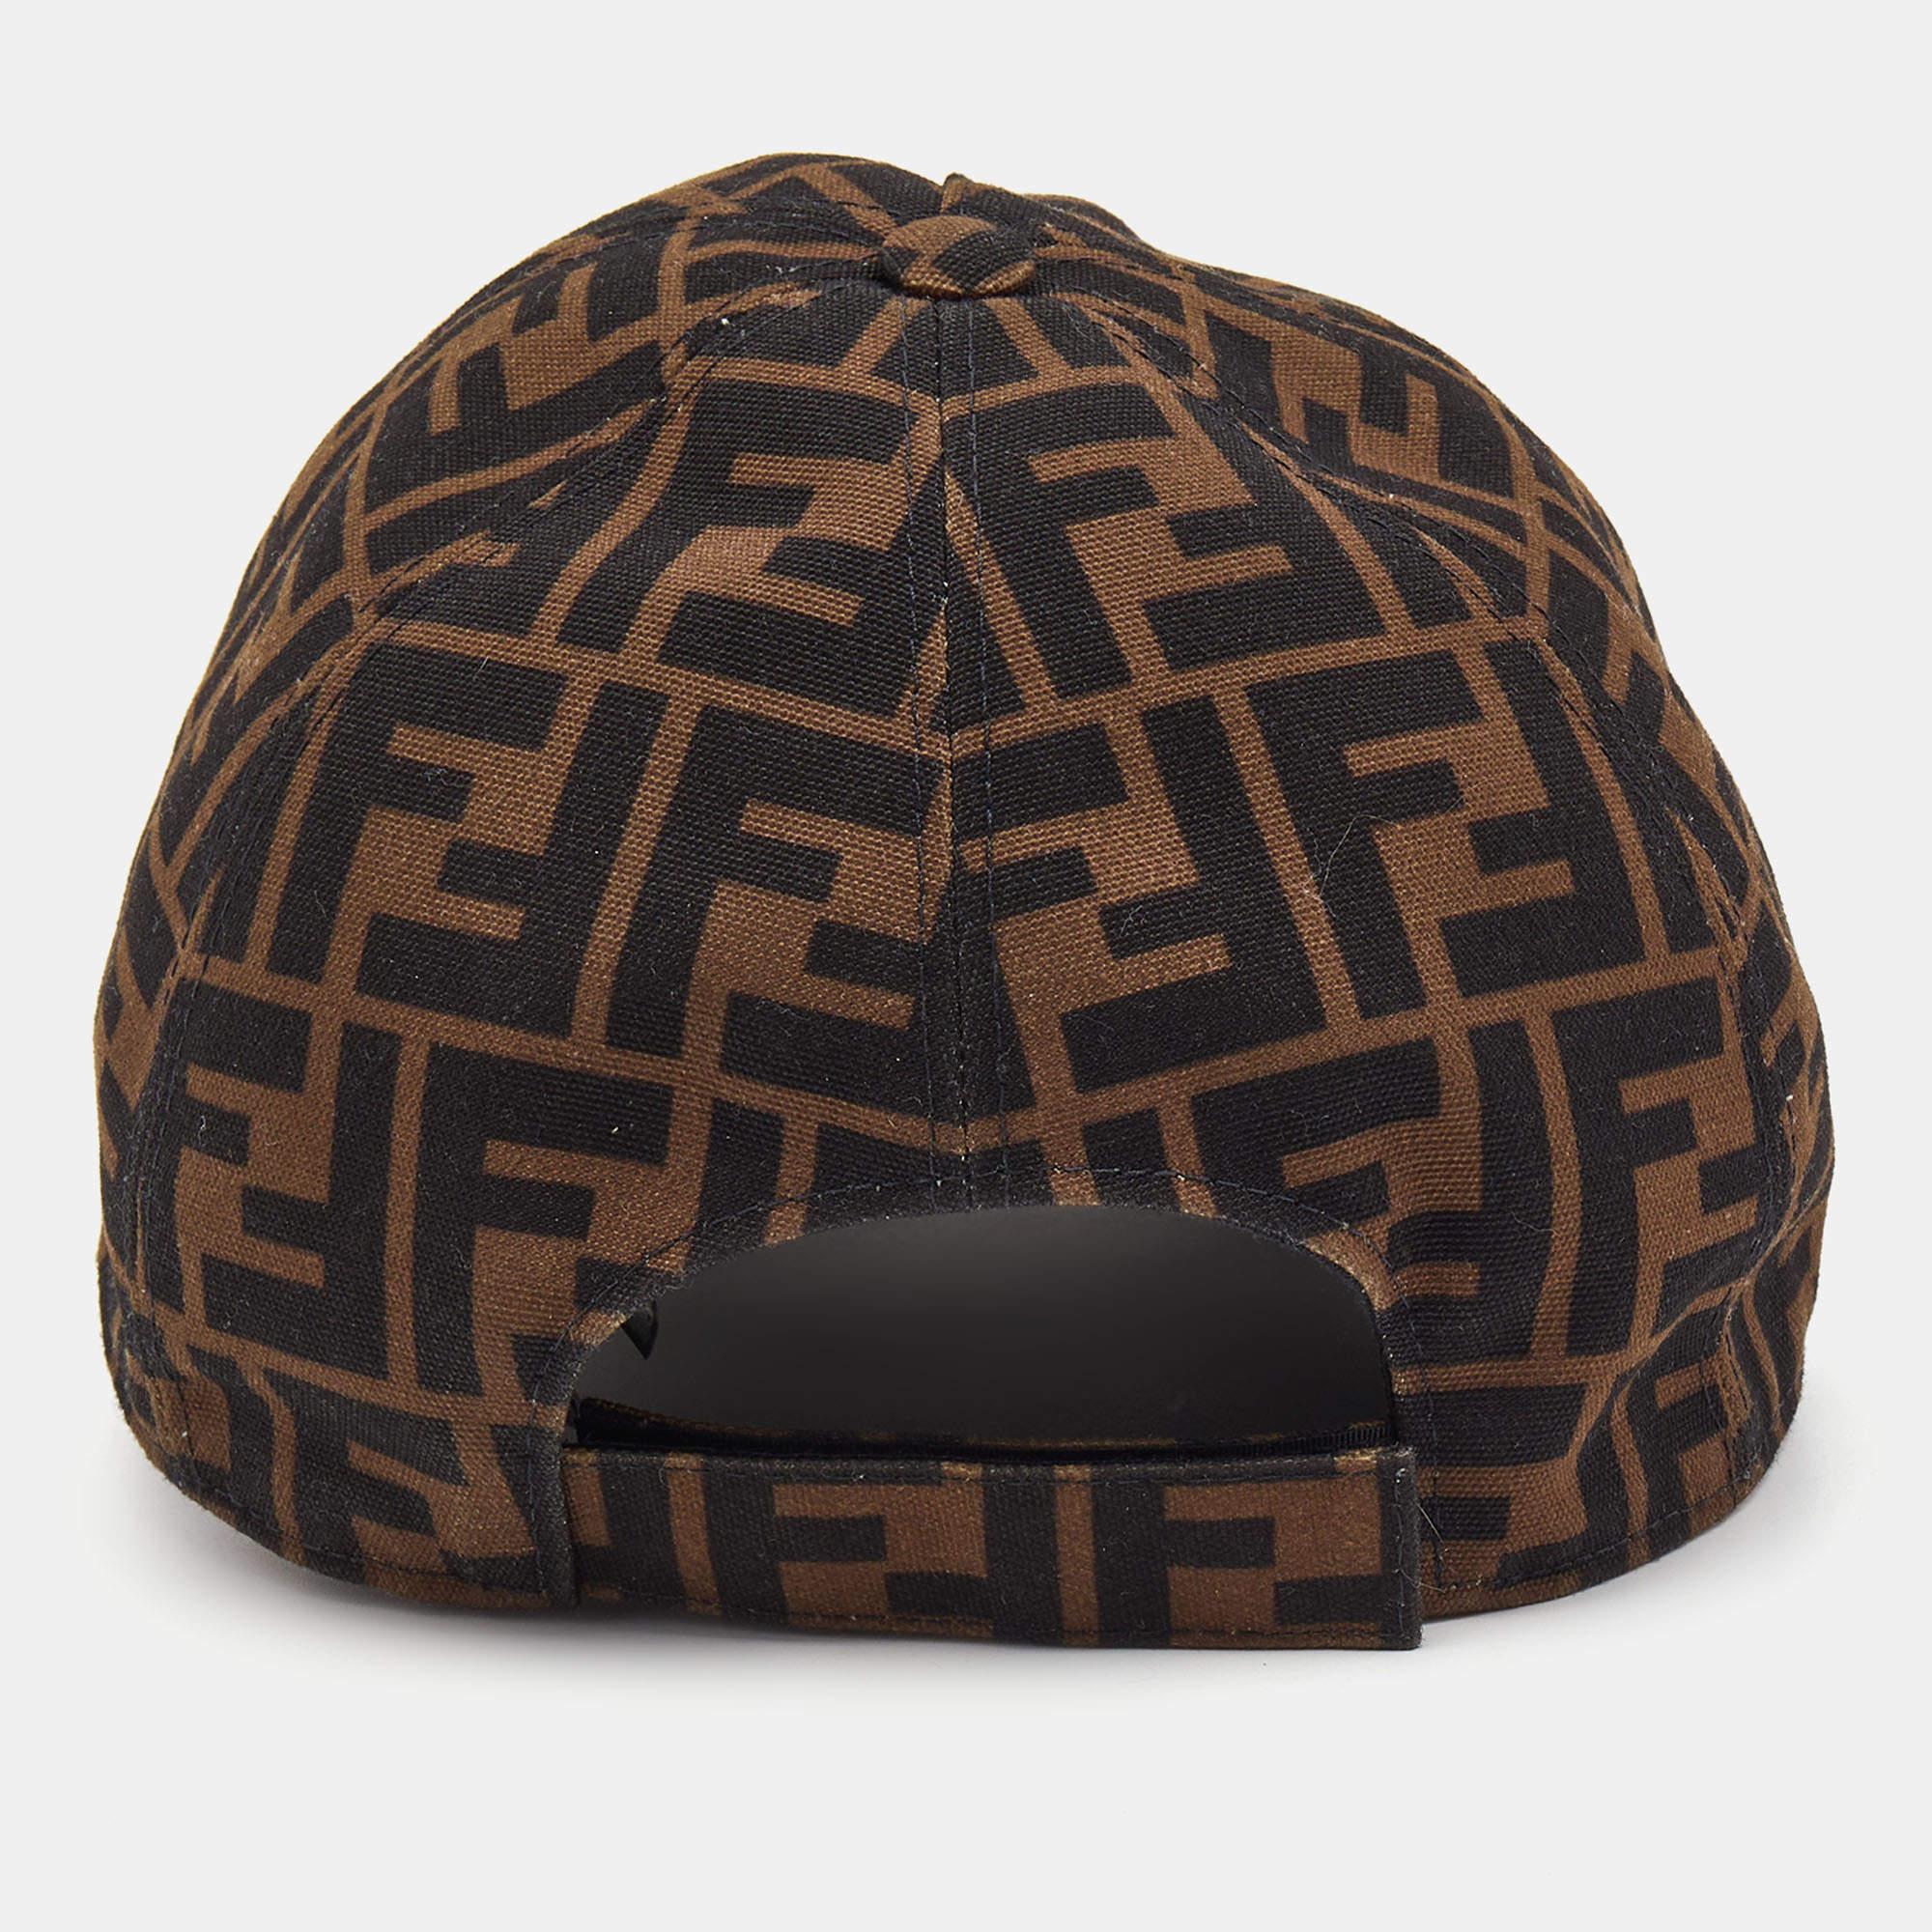 Caps are an ideal style statement with casual outfits. This Fendi piece is made from quality materials and features signature elements. This piece will be a smart addition to your cap collection.

